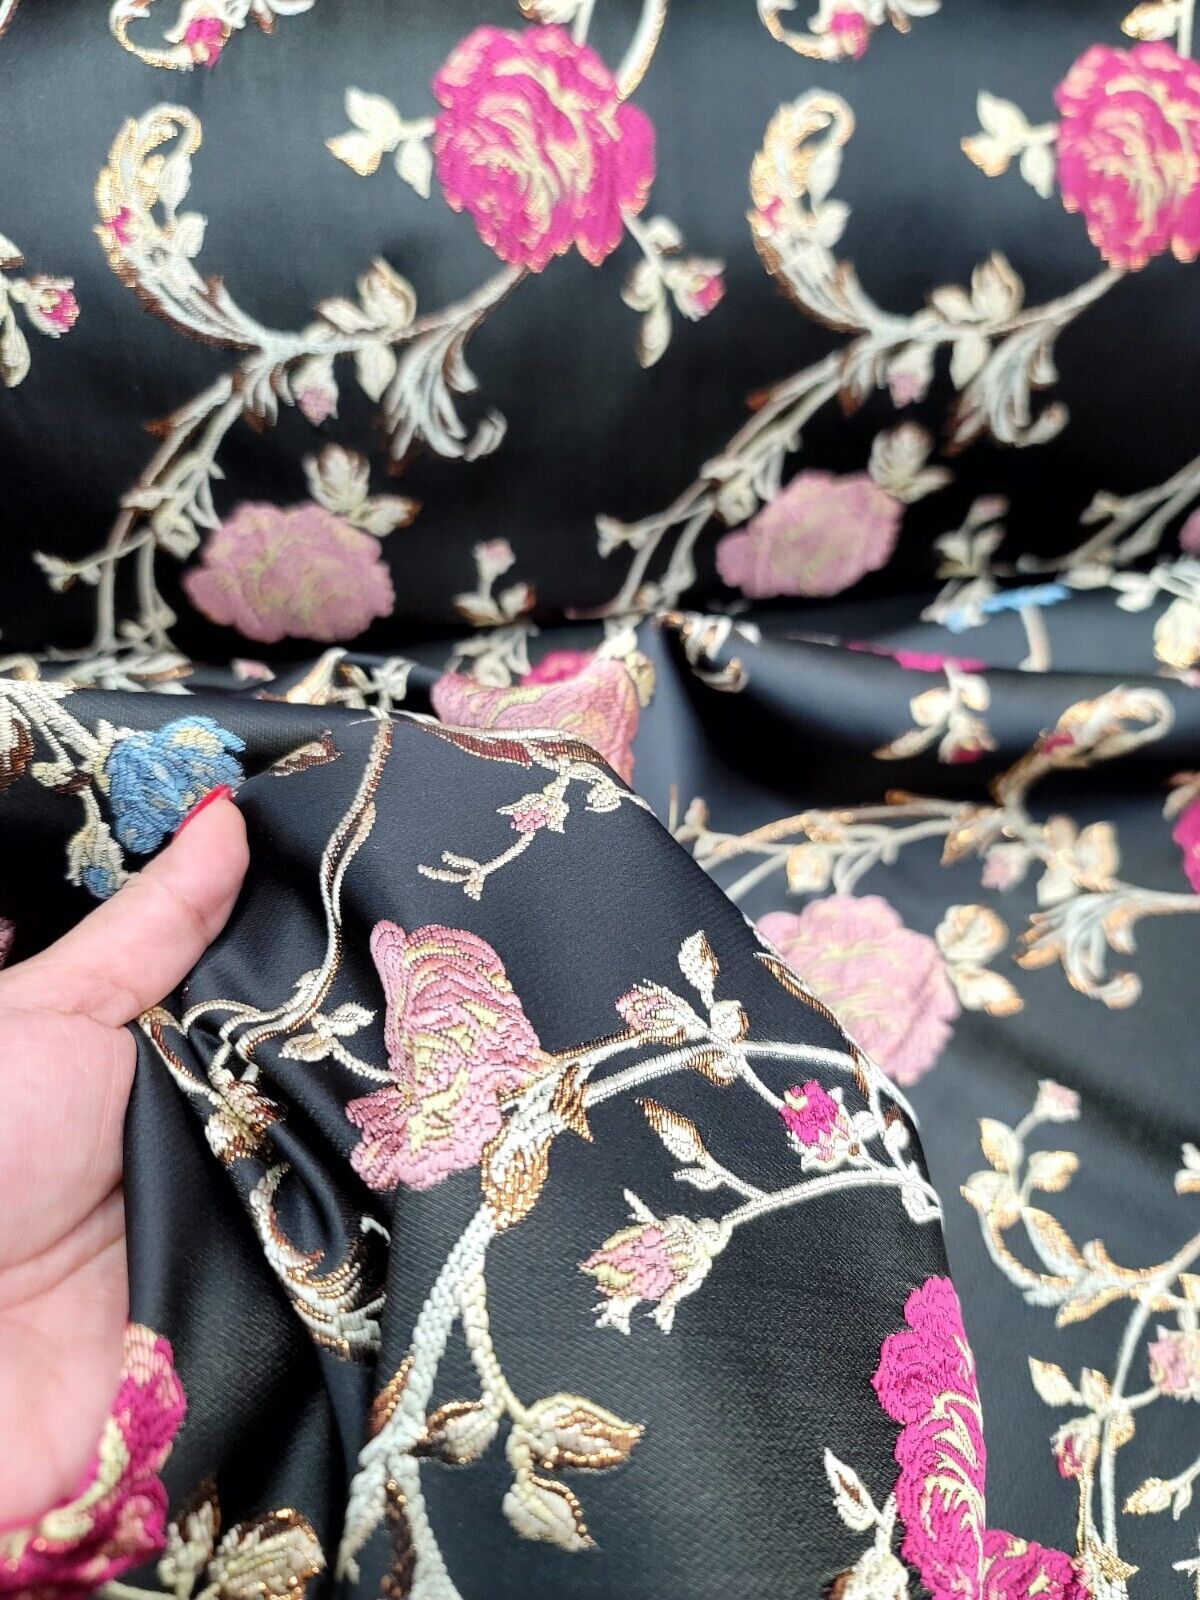 Black Brocade Fabric by the Yard - Exquisite Floral Pattern in Pink, Gold, and Blue - Perfect for Dresses and Upholstery